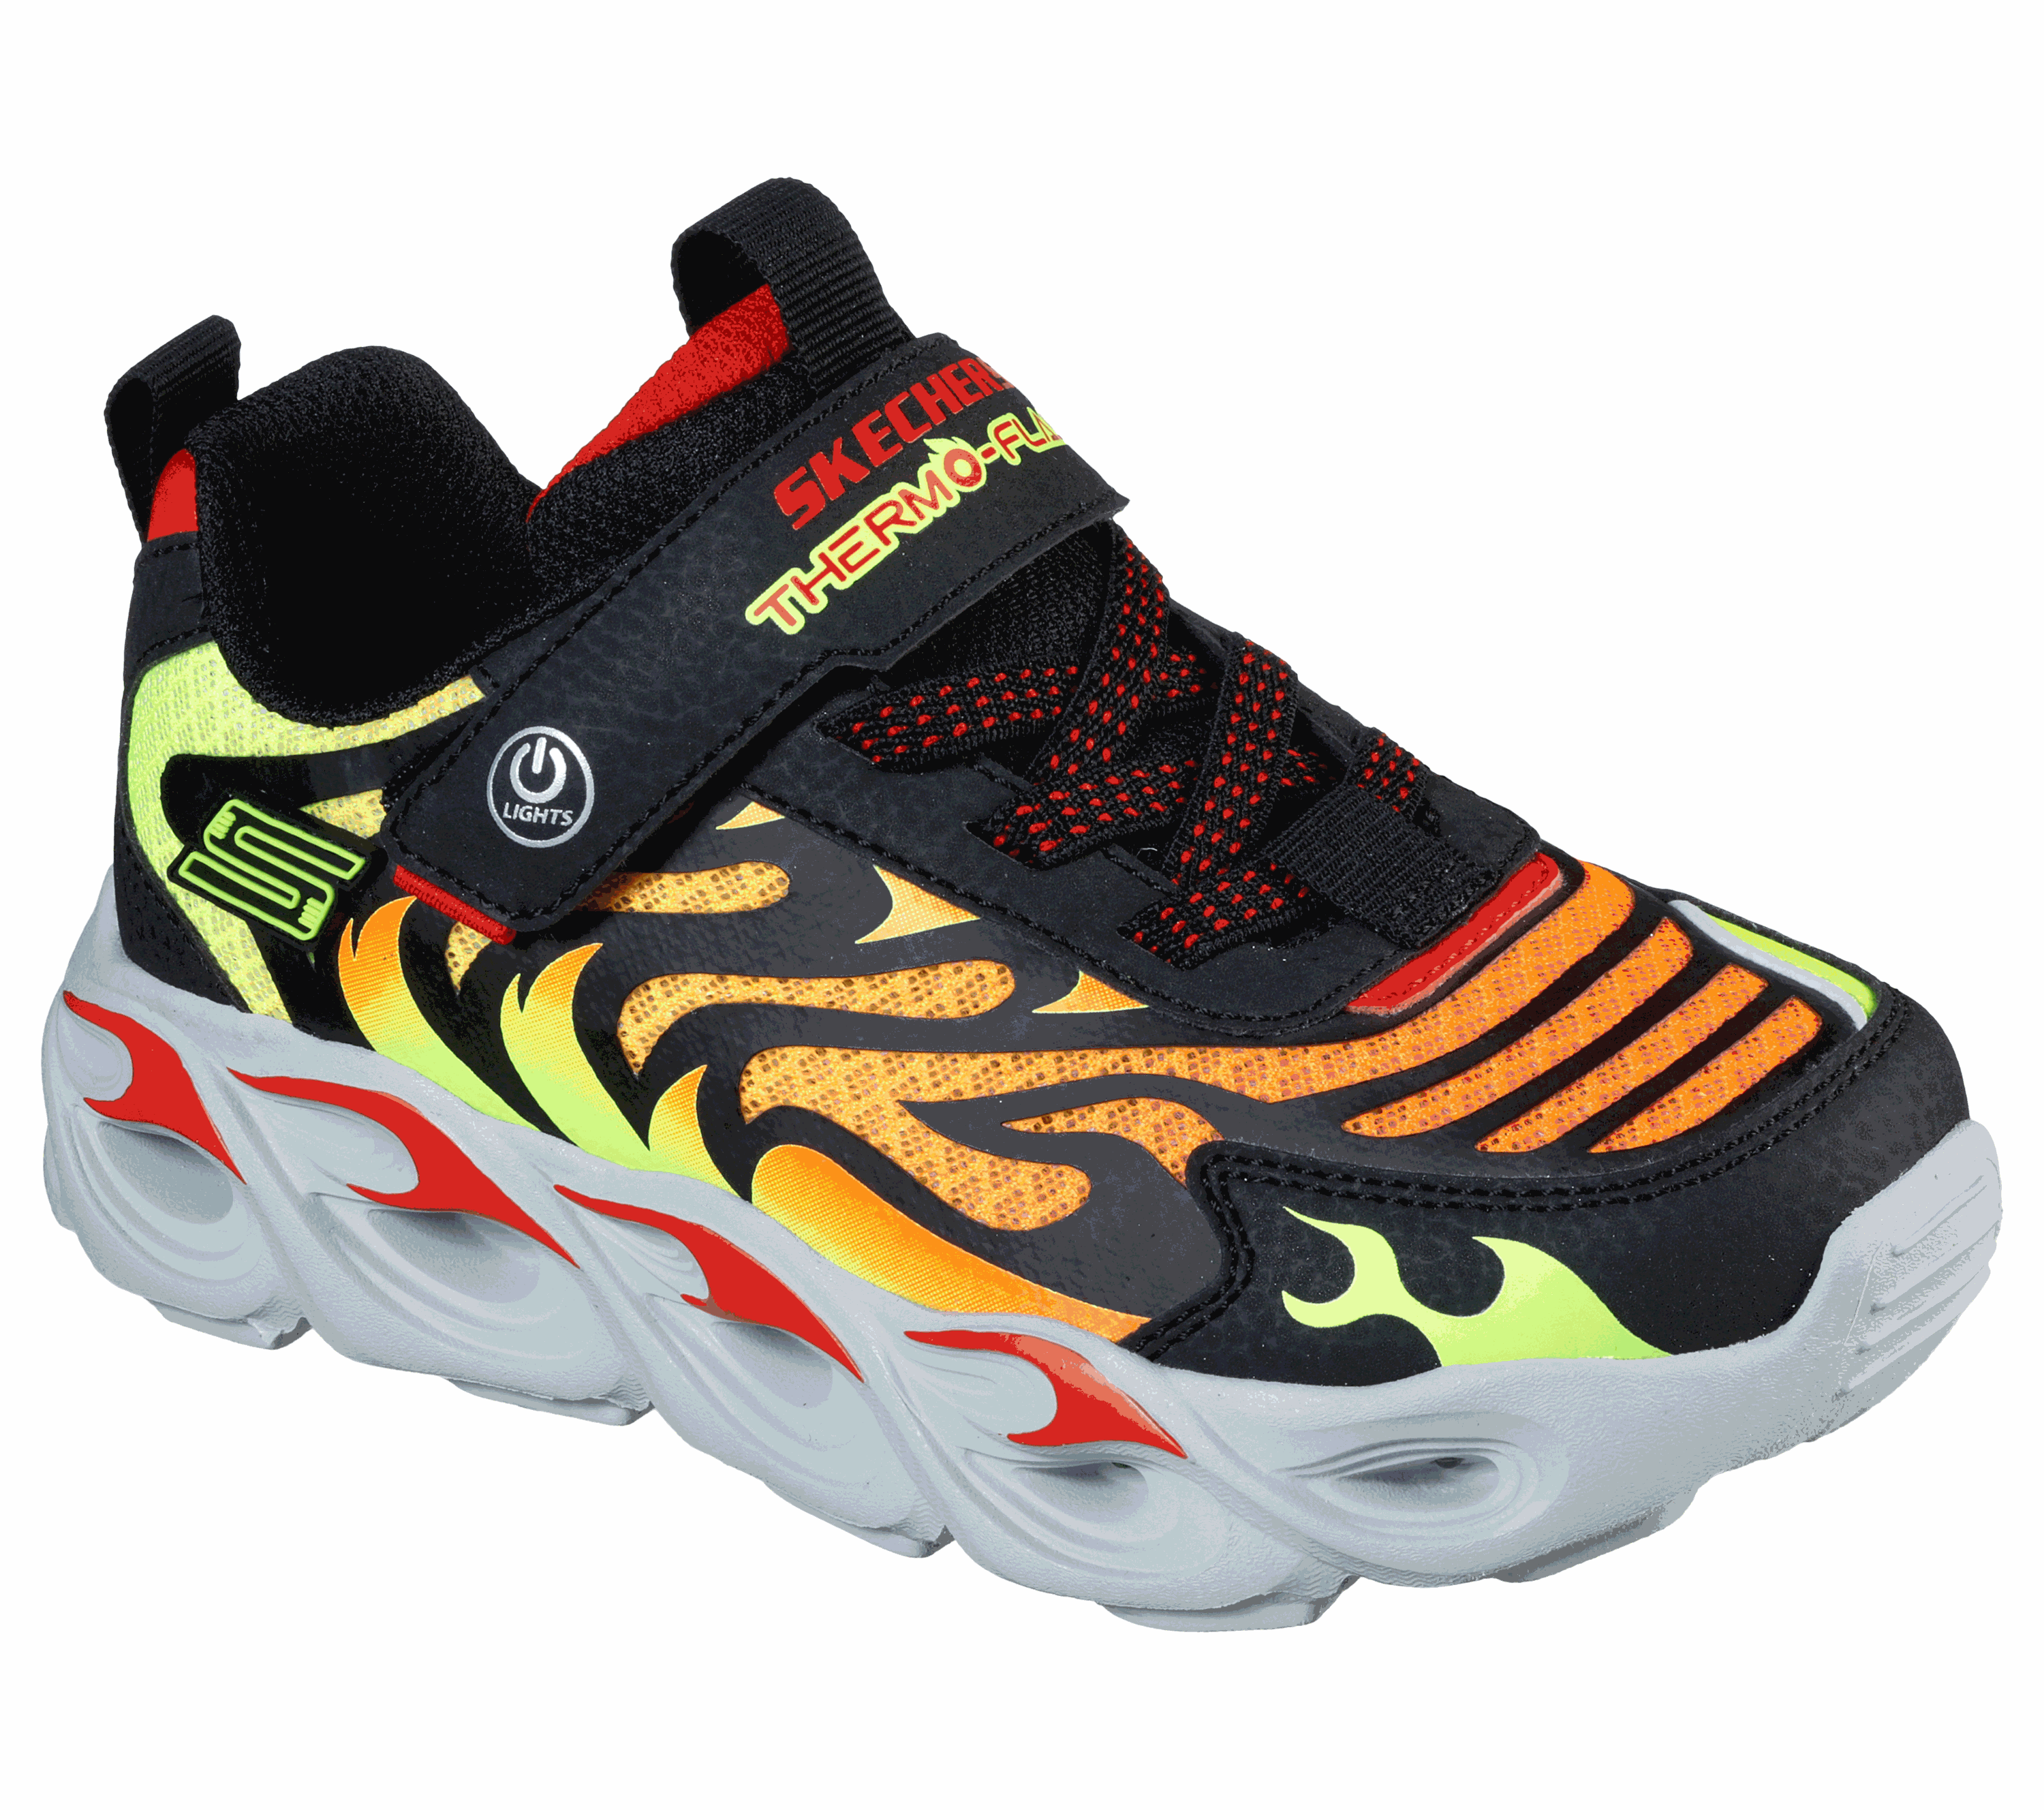 skechers light up shoes directions